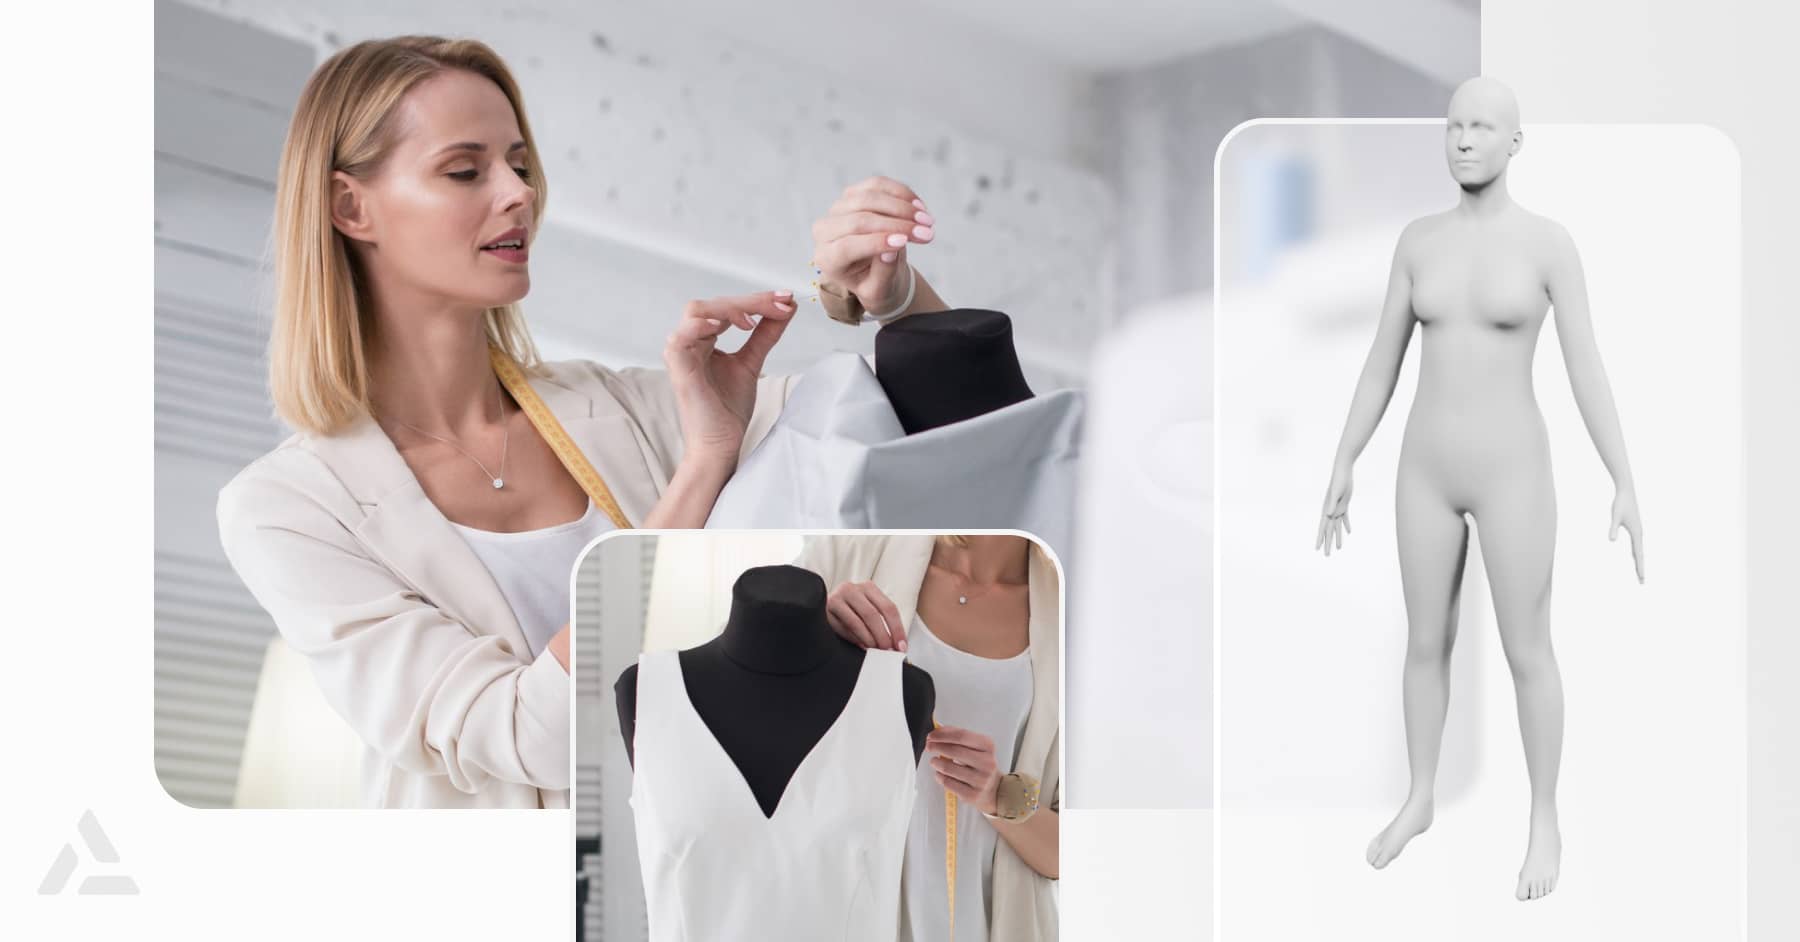 A woman adjusting an apparel necklace on a mannequin with an inset showing a close-up of the necklace and an illustrated figure.